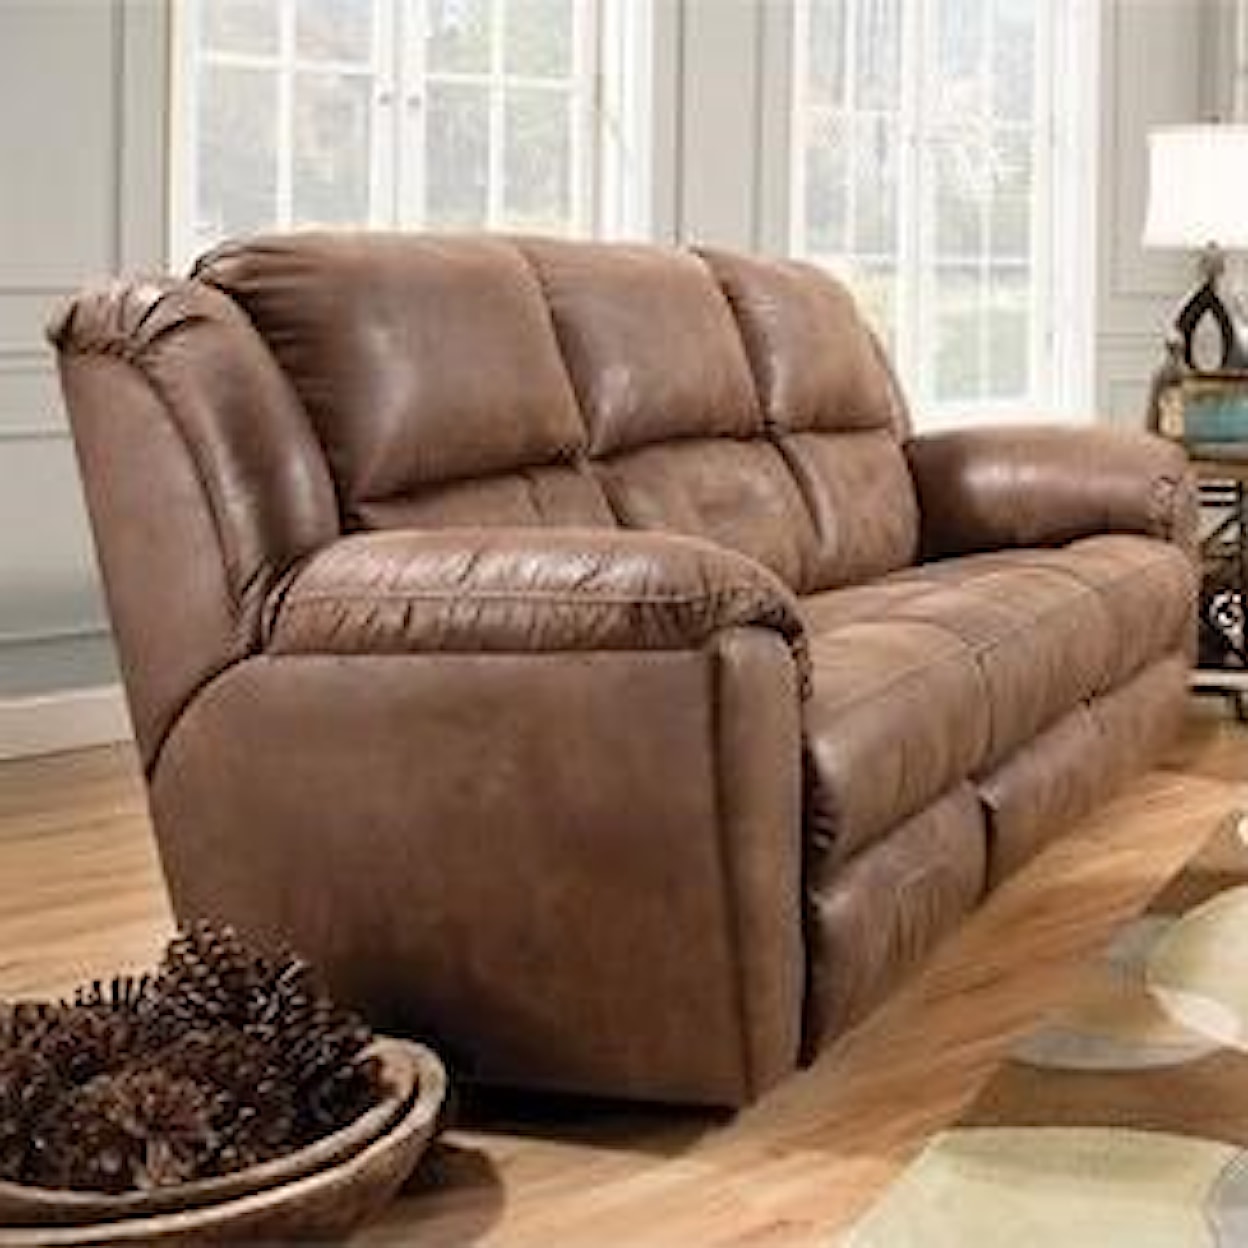 Southern Motion Pandora Reclining Sofa with Power Headrests